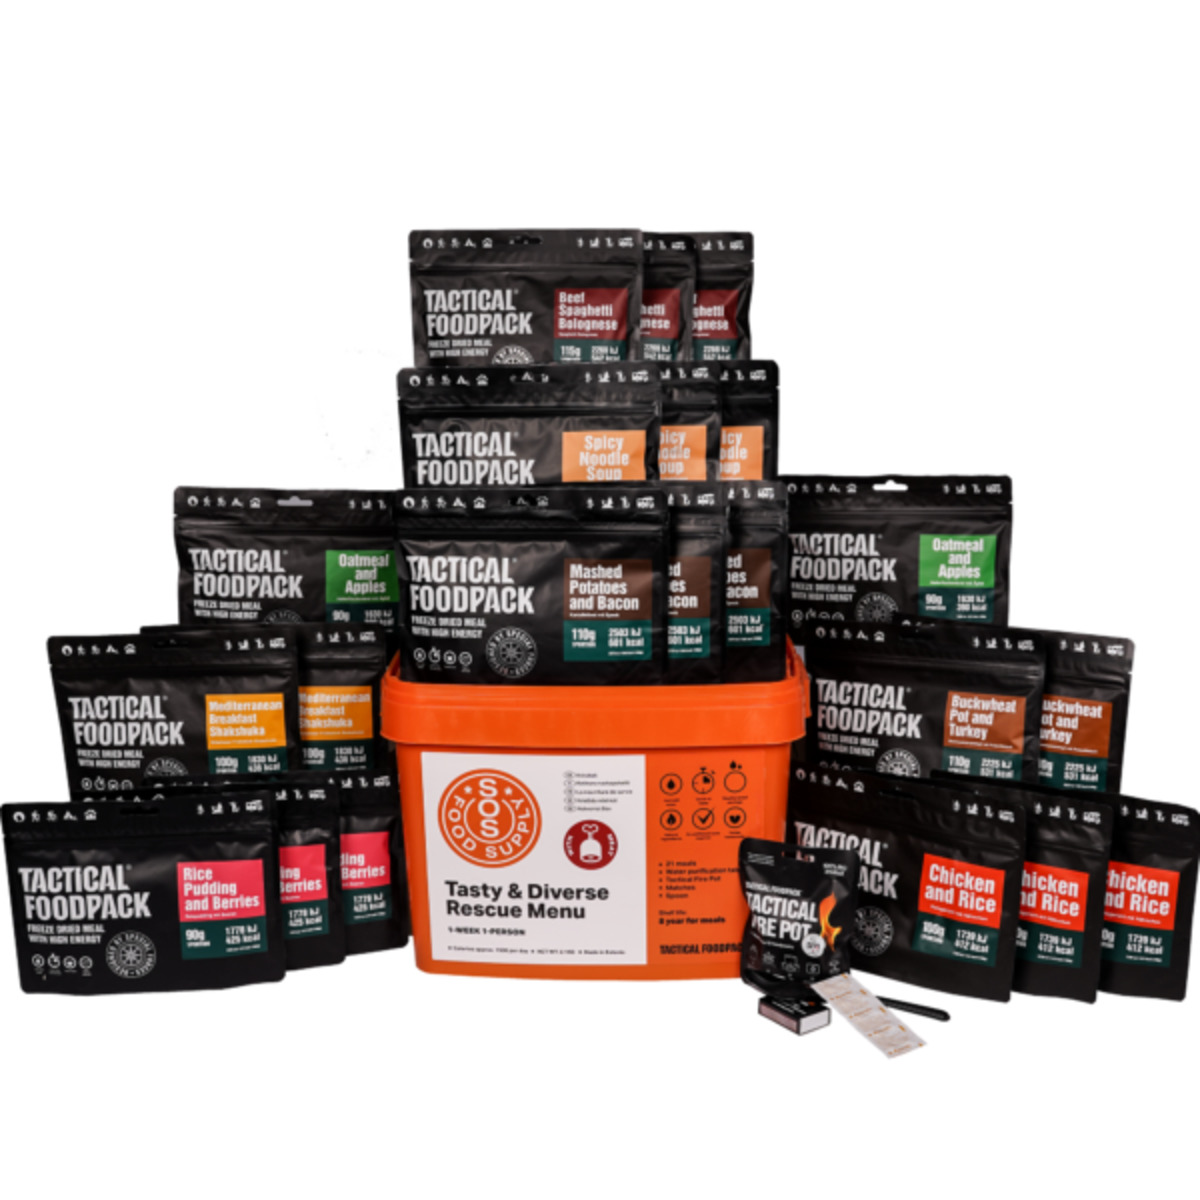 7-days food package - Tactical SOS Food Supply - 8 years